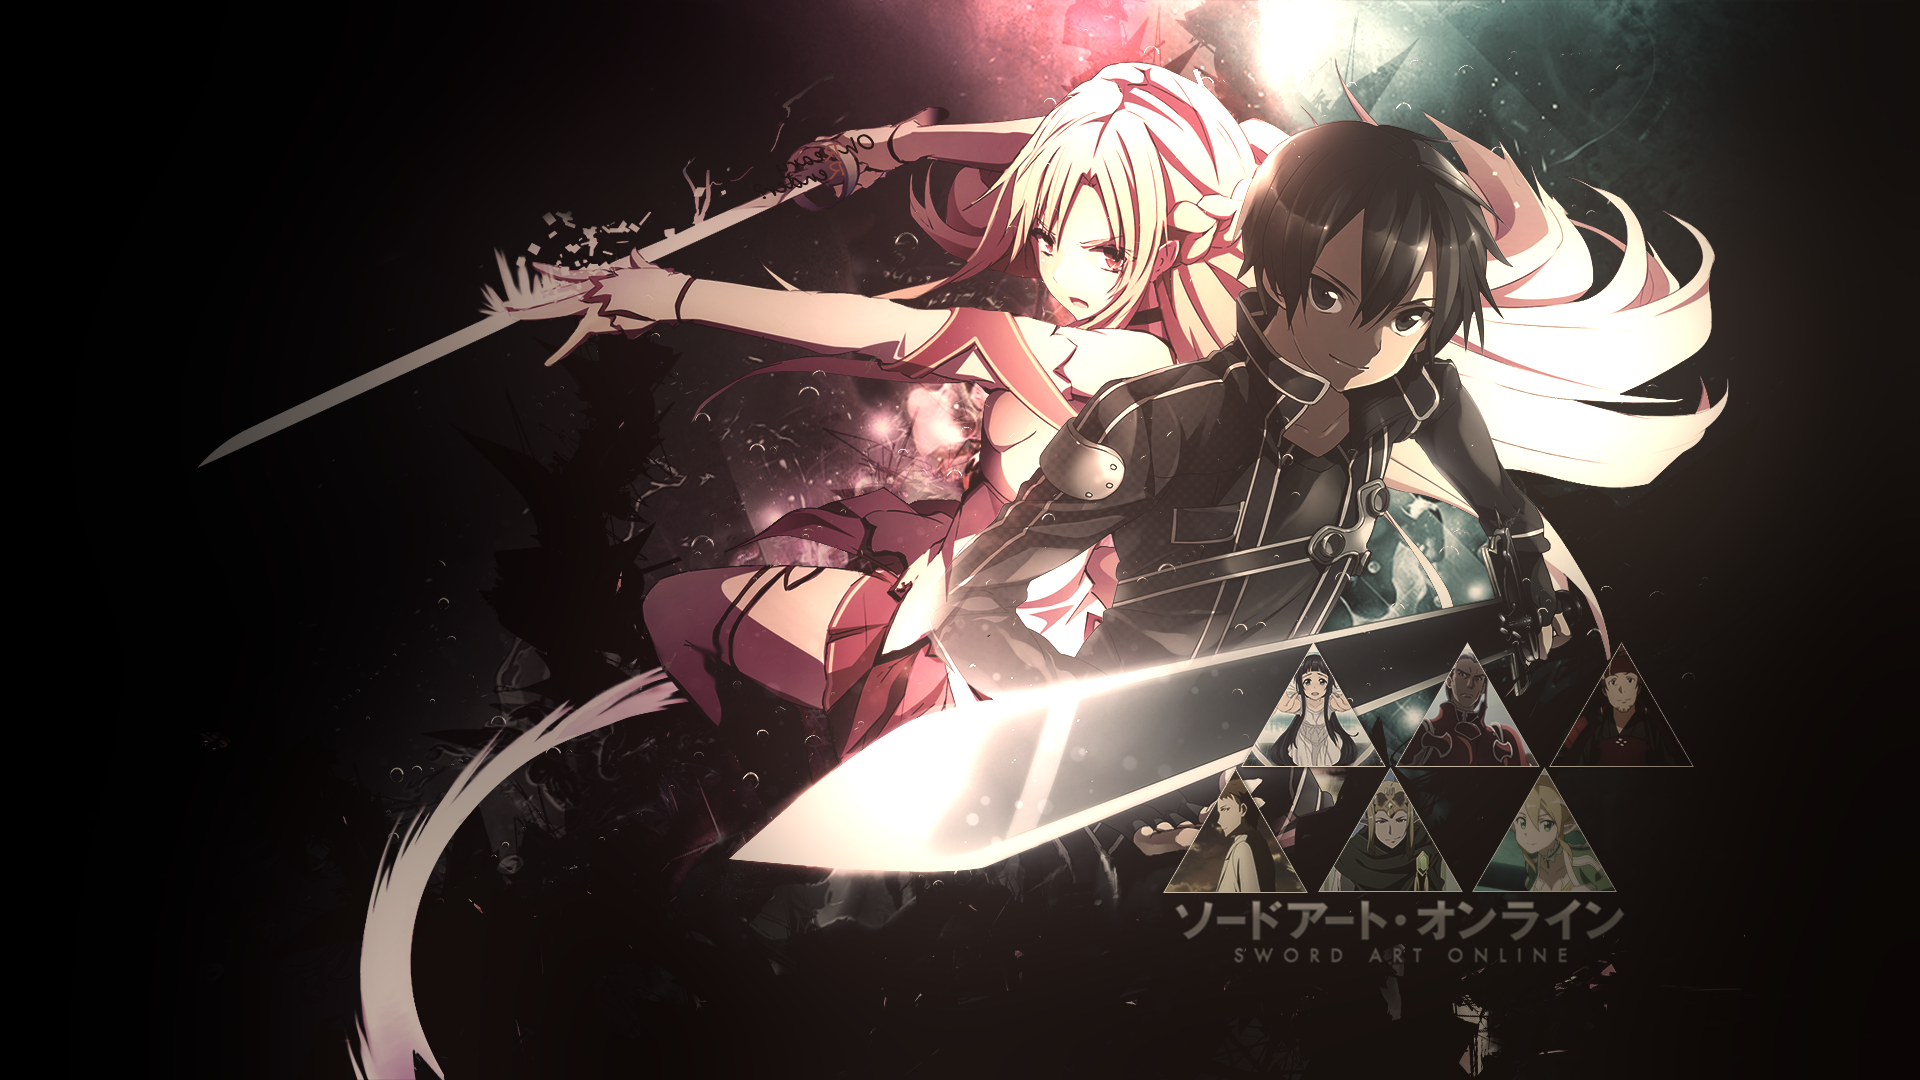 Sword Art Online Wallpapers High Quality | Download Free